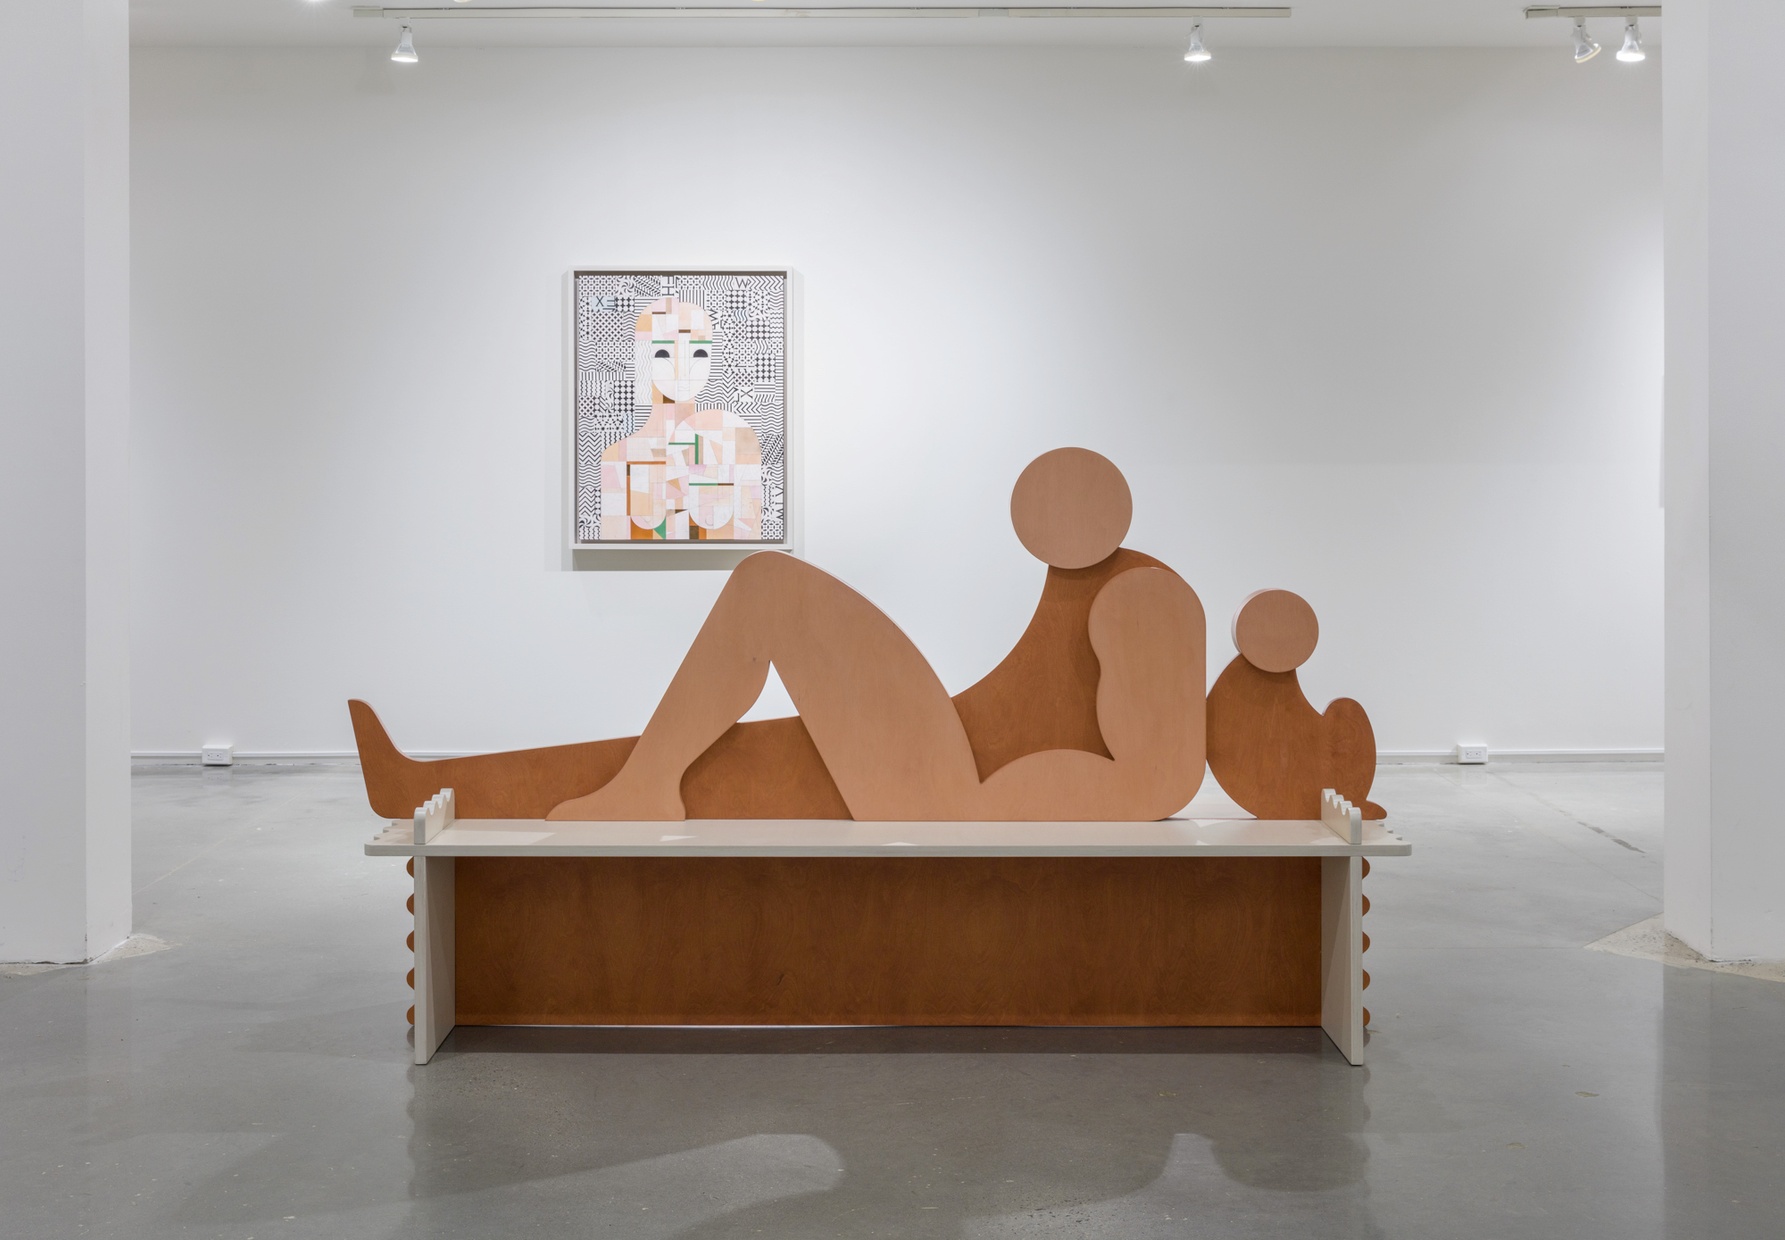 A sculpture of a large, brown, abstract figure reclining with one leg outstretched and one leg bent leaning against a small, crouched, abstract figure.